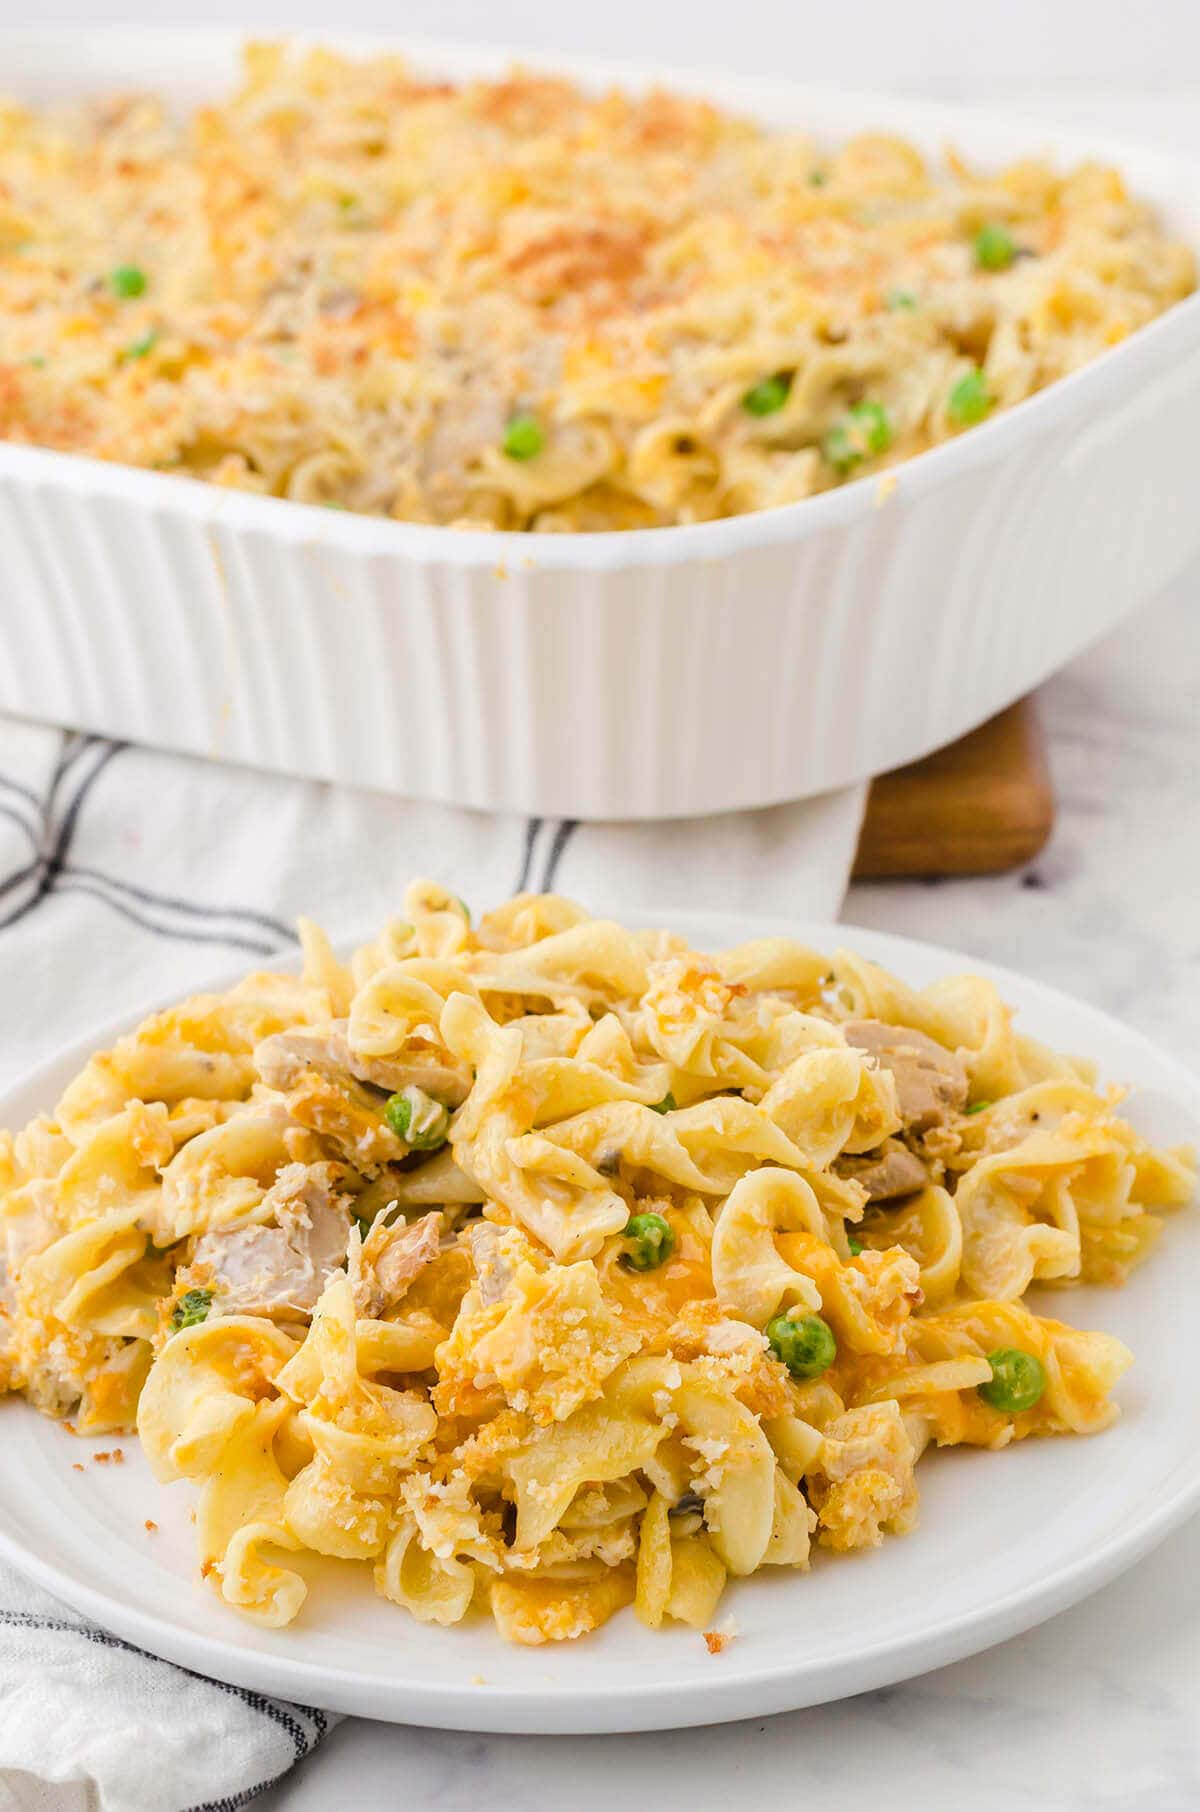 Plate filled with tuna noodle casserole, with full casserole dish in the background.